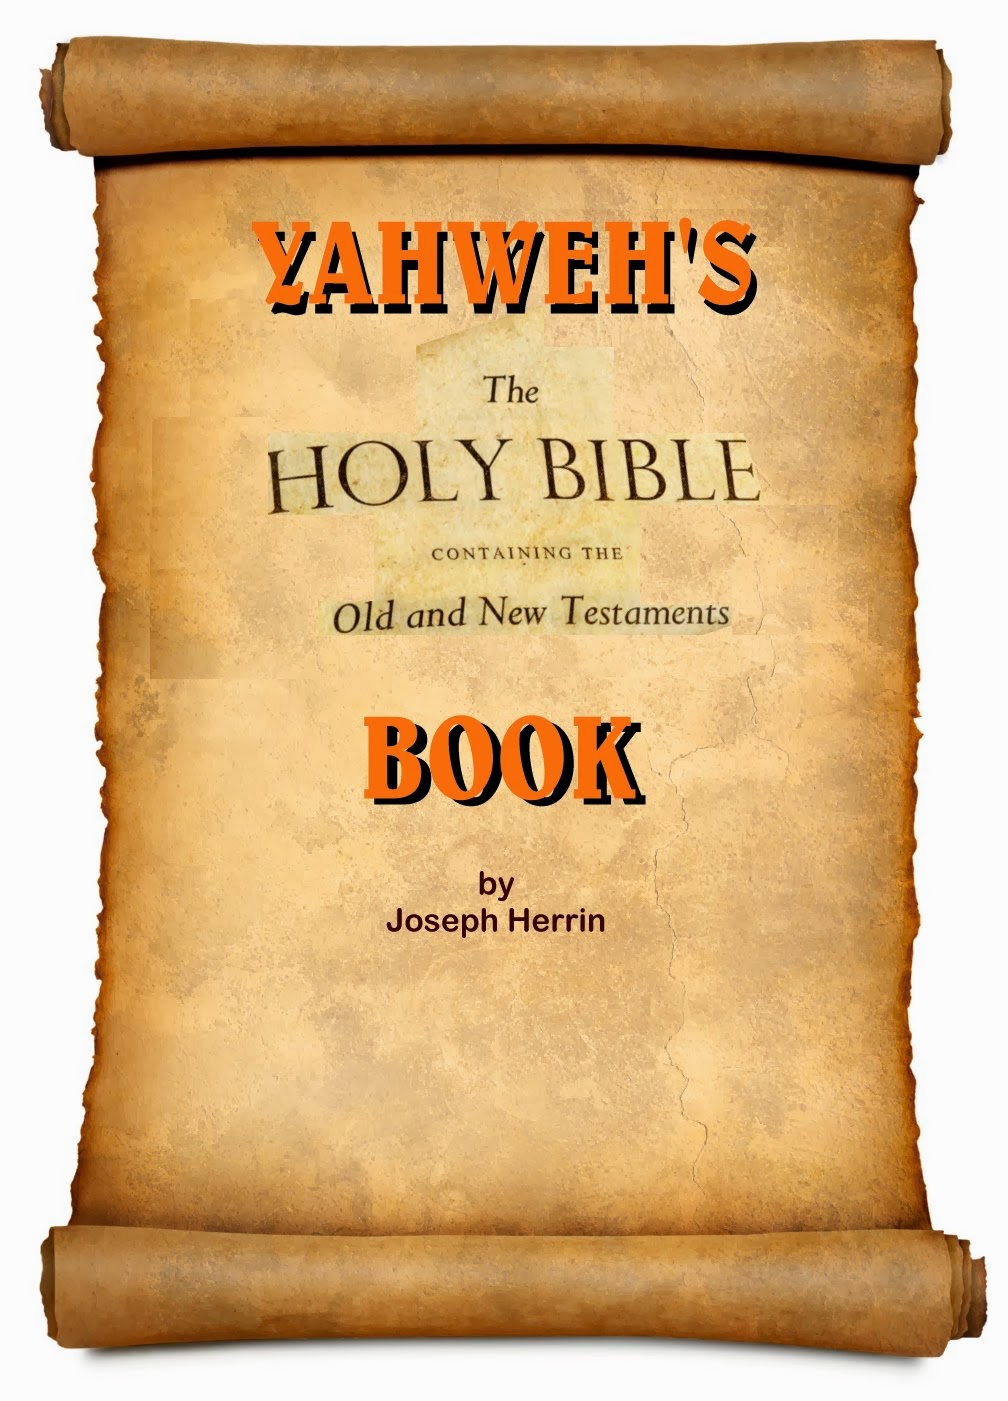 Yahweh’s Book – The Myth of an Inerrant Text